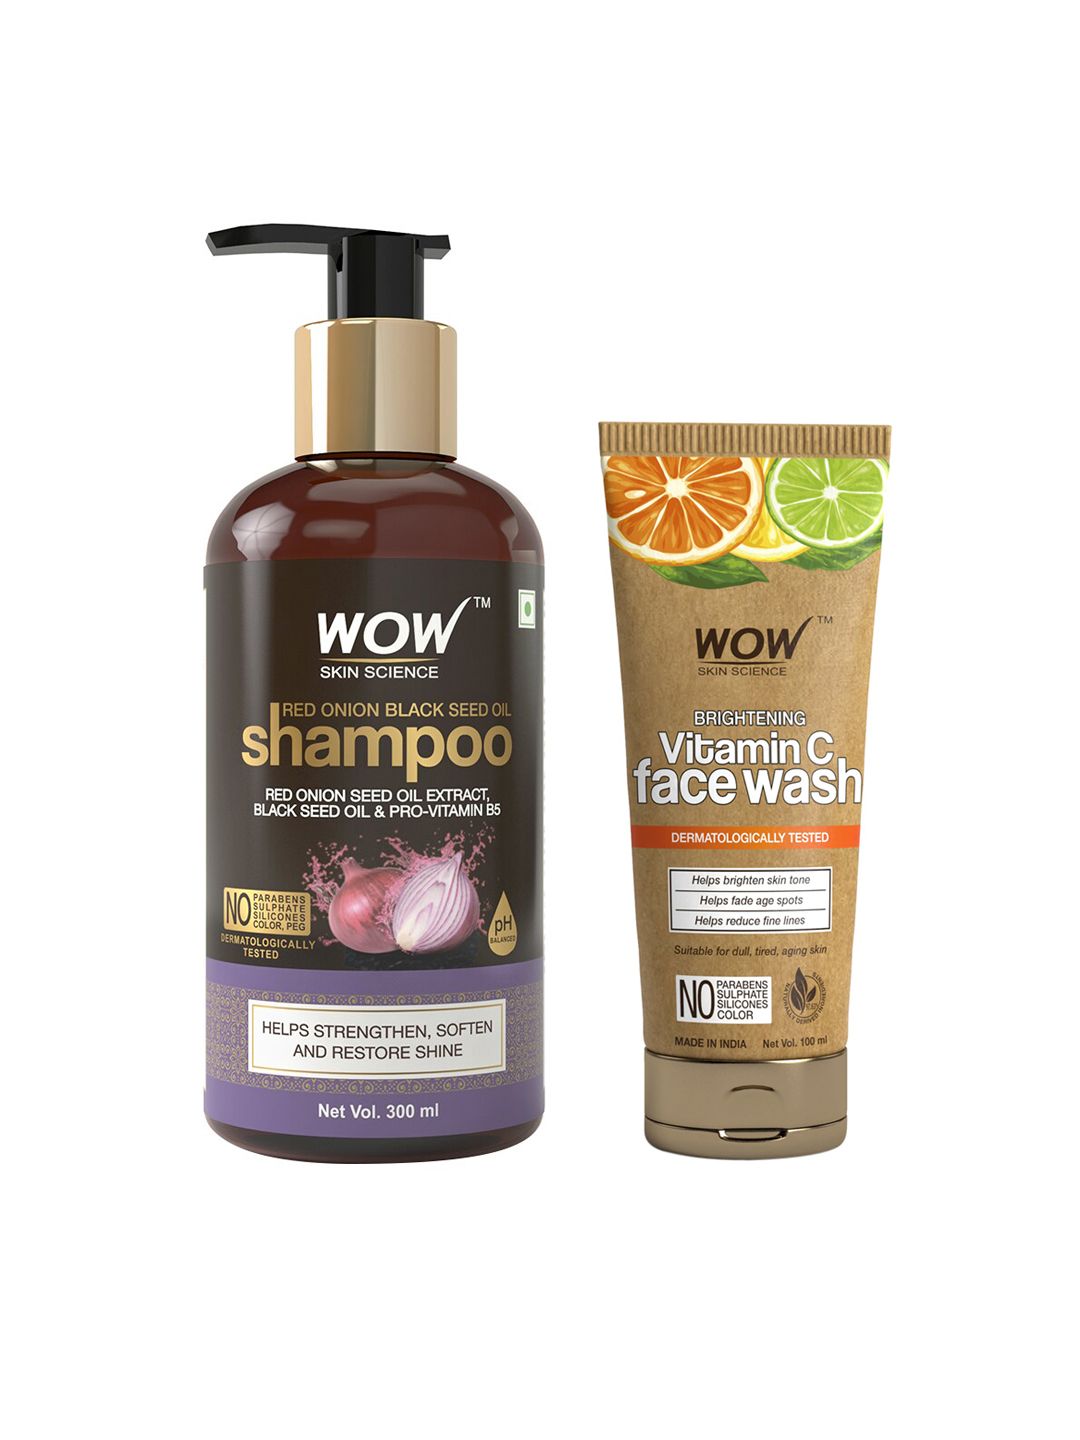 WOW SKIN SCIENCE Set of Shampoo & Facewash Price in India